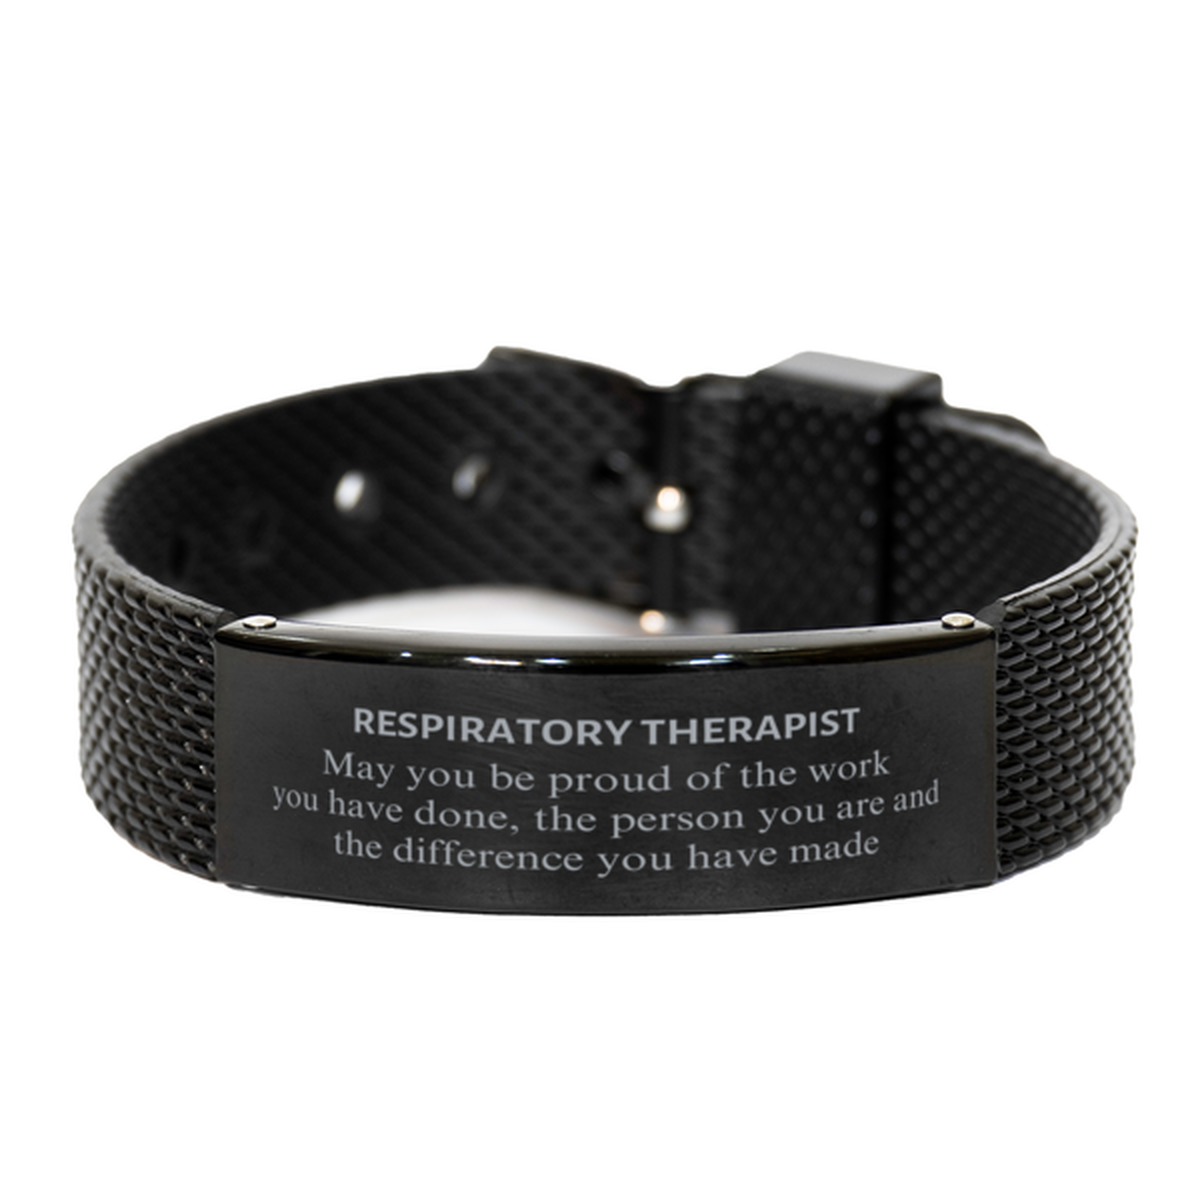 Respiratory Therapist May you be proud of the work you have done, Retirement Respiratory Therapist Black Shark Mesh Bracelet for Colleague Appreciation Gifts Amazing for Respiratory Therapist